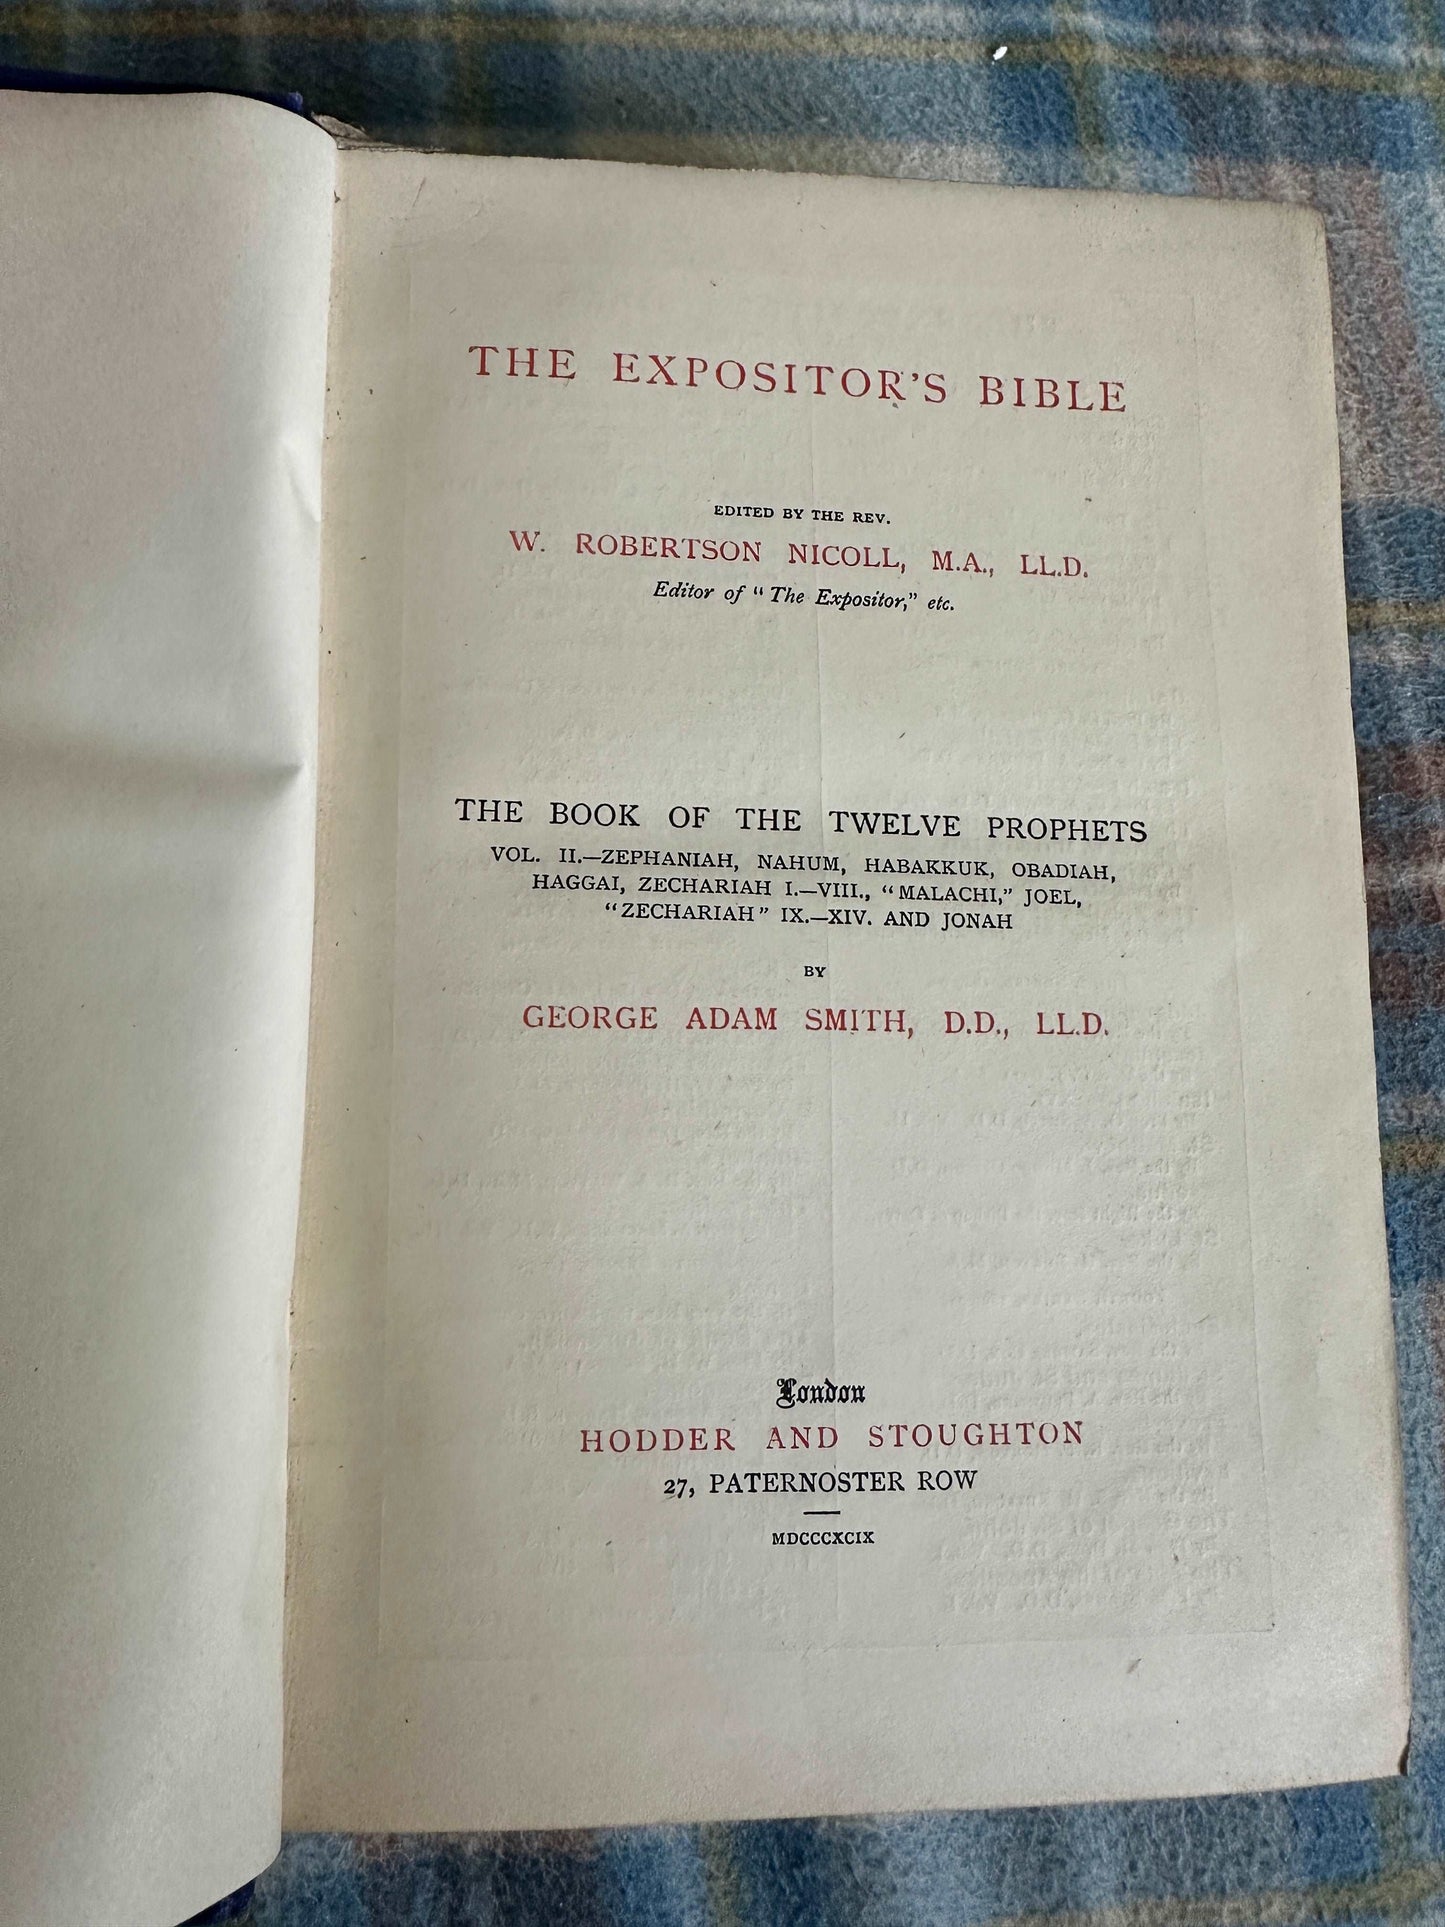 1899 The Expositor’s Bible(The Book Of The Twelve Prophets) George Adam Smith (Hodder & Stoughton)